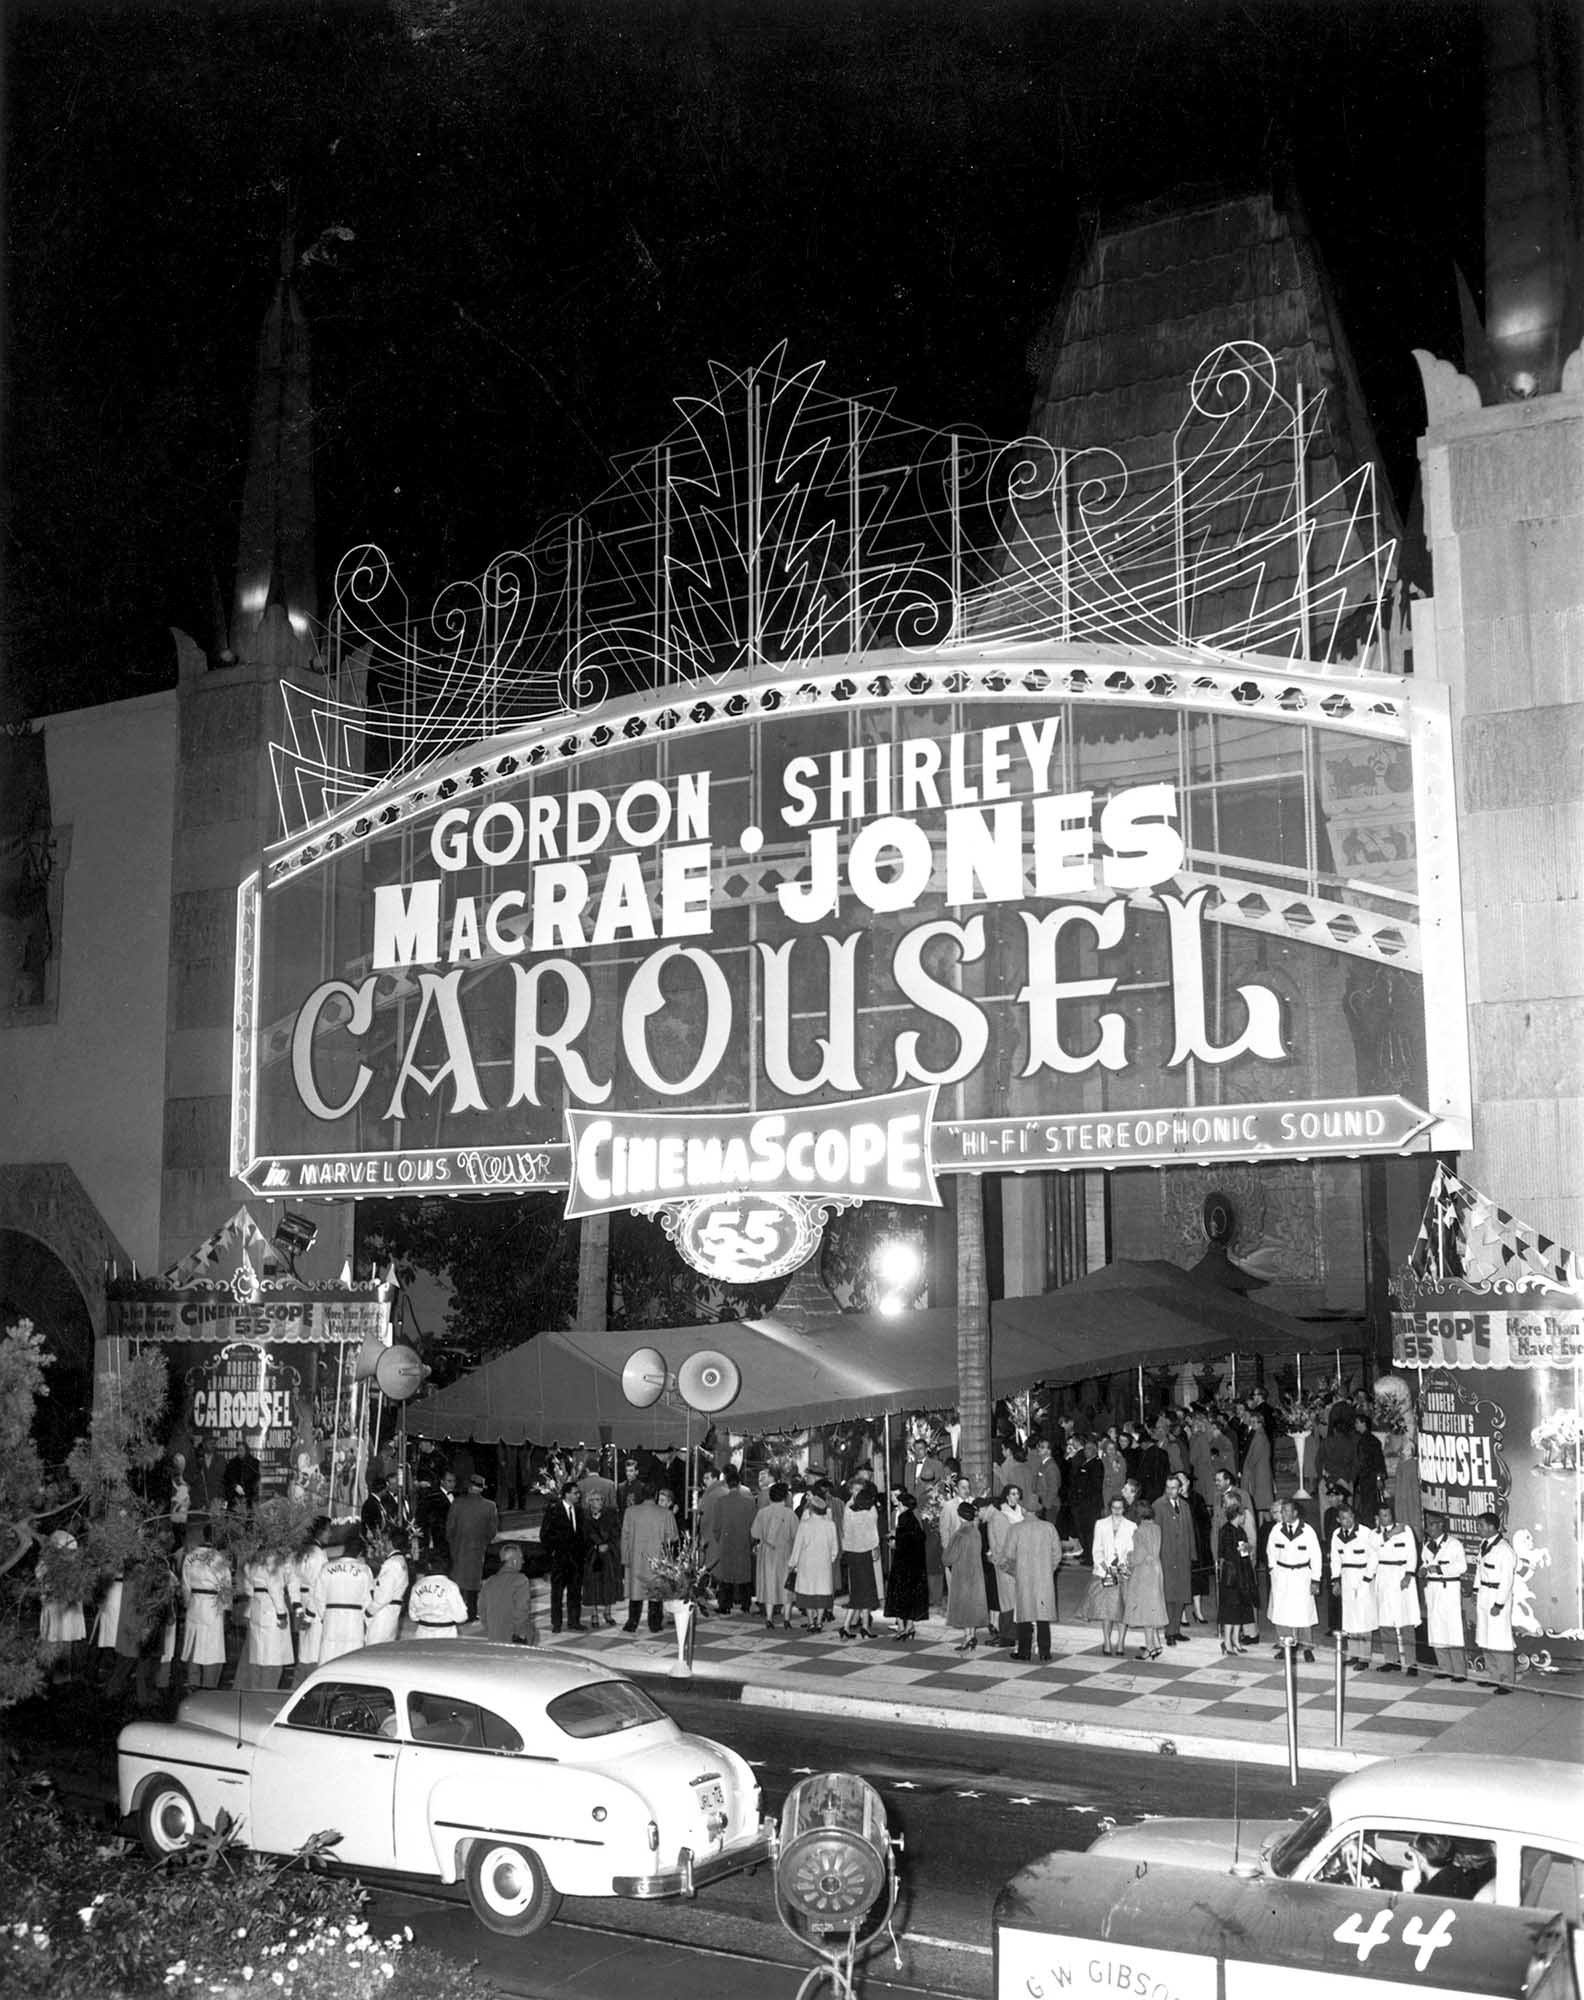 A marquee from the 1956 film premiere of Carousel.